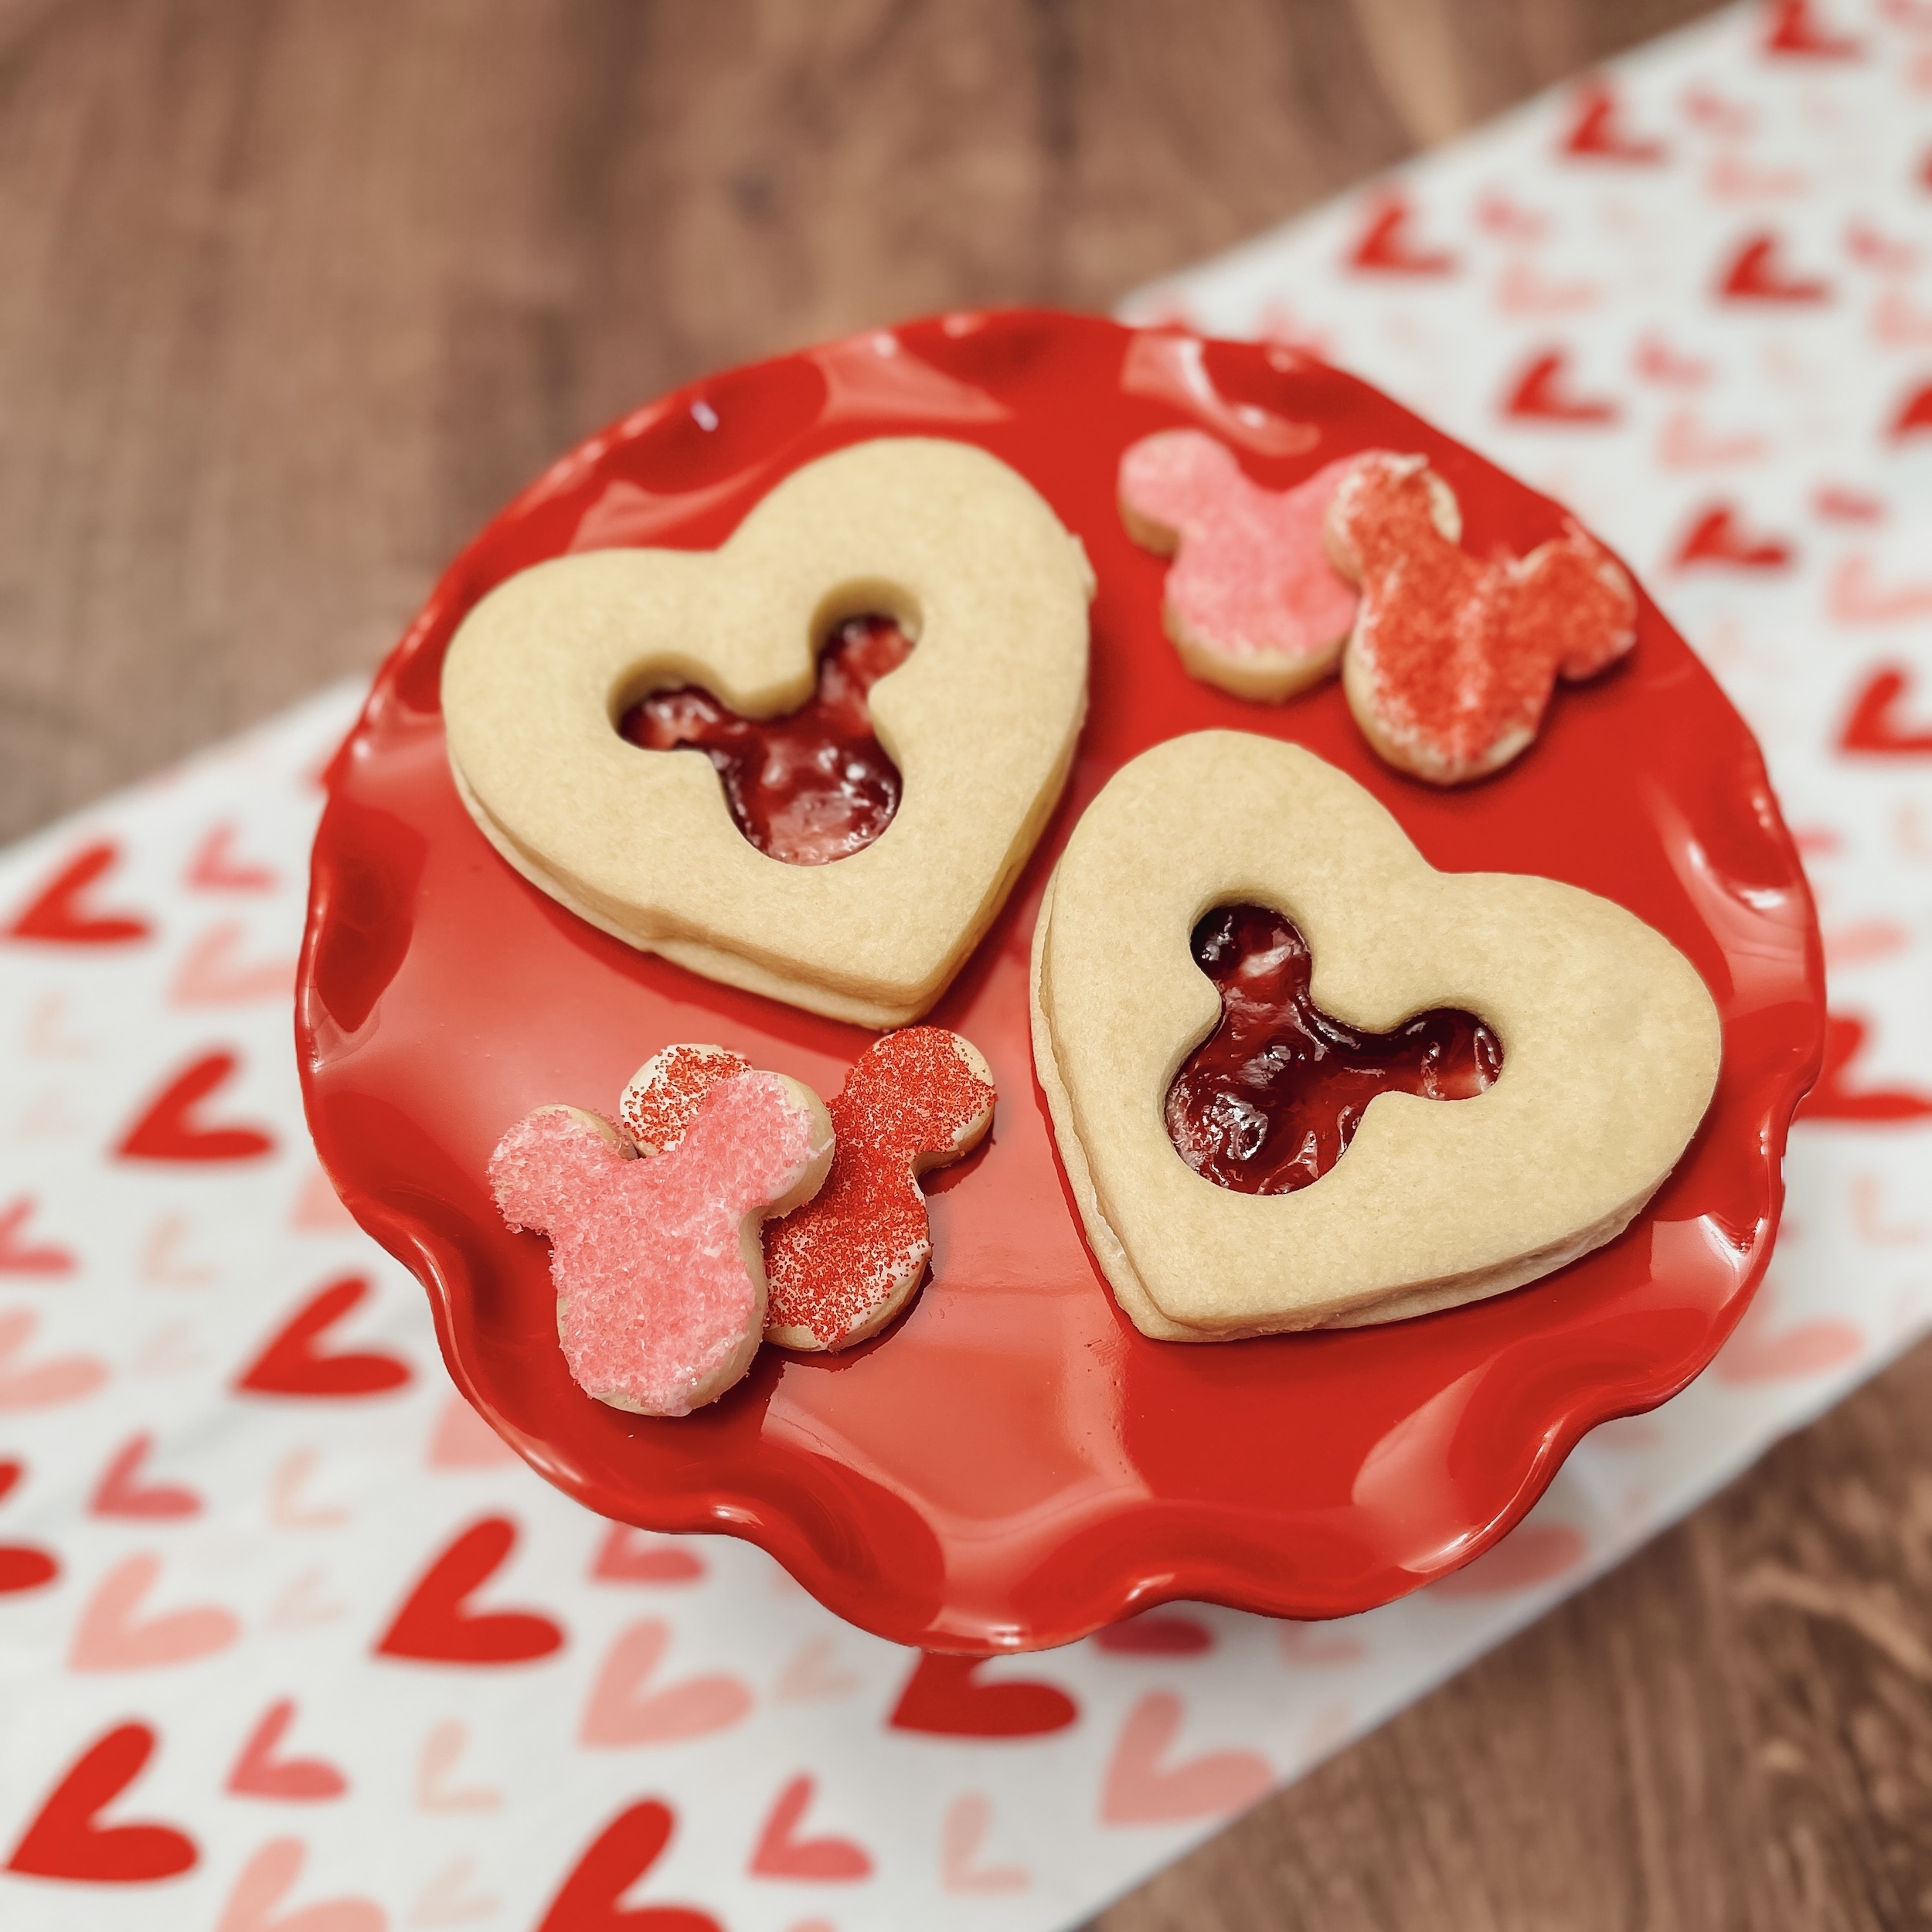 Mickey's Valentine Cookies (two heart shaped shortbread cookie sandwiches with mickey shaped cut out on a red platter)